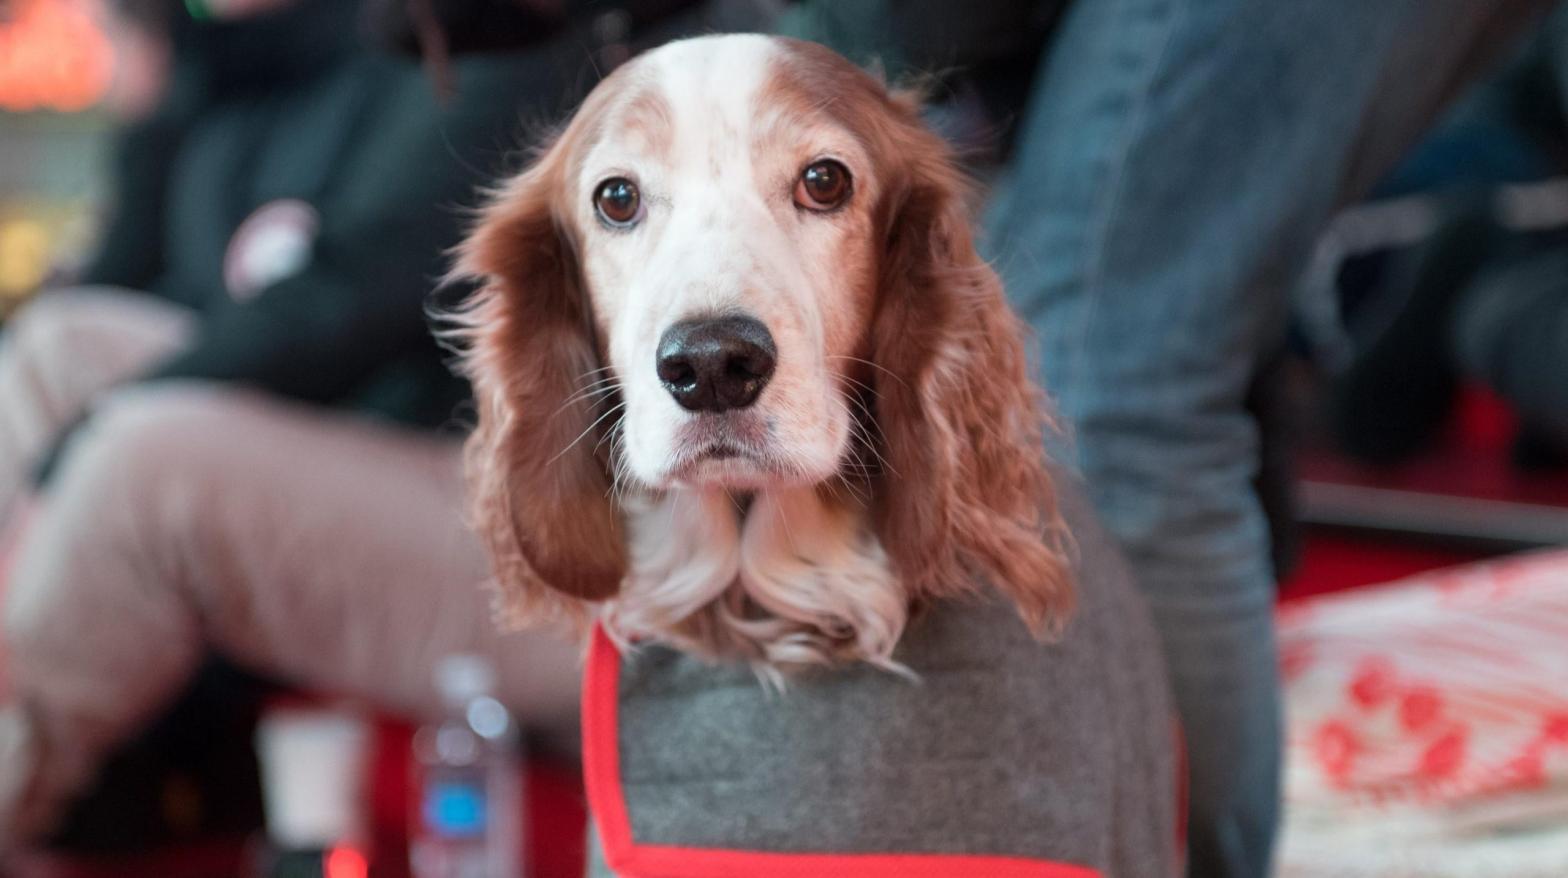 A dog at the January Midnight Moment concert for dogs: Heart Of a Dog by Laurie Anderson, held at Duffy Square on January 4, 2016 in New York City (Photo: Noam Galai, Getty Images)